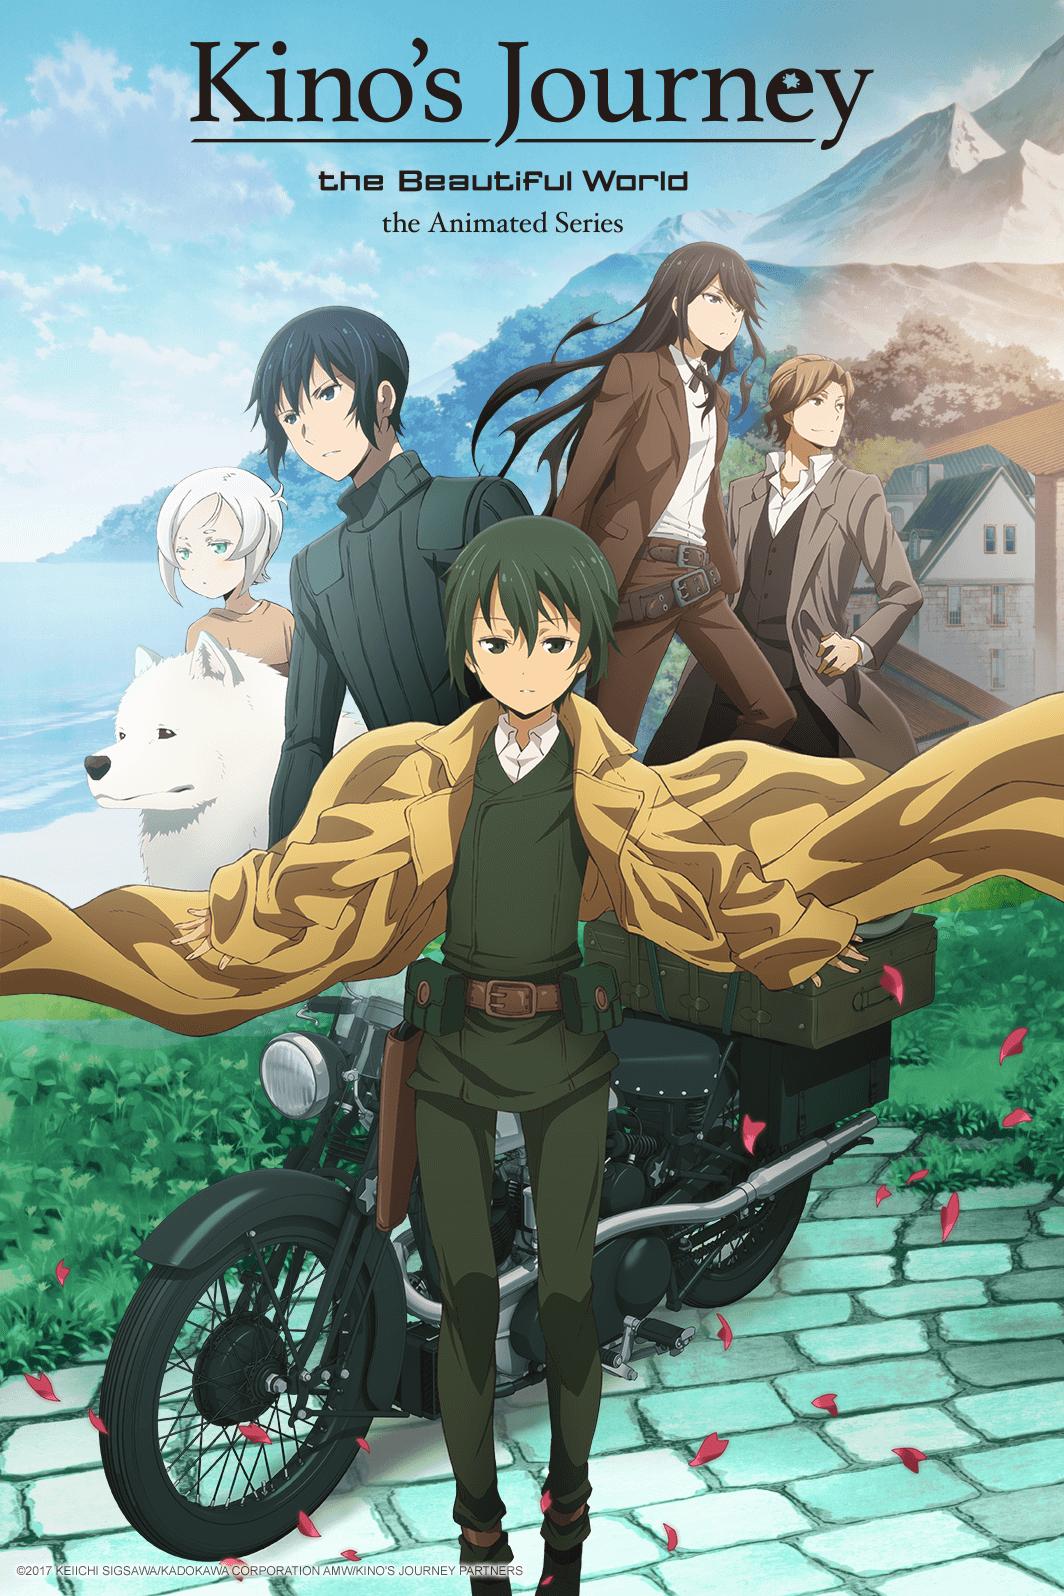 Kino's Journey: The Beautiful World - The Animated Series - TheCompl (shin  - その他